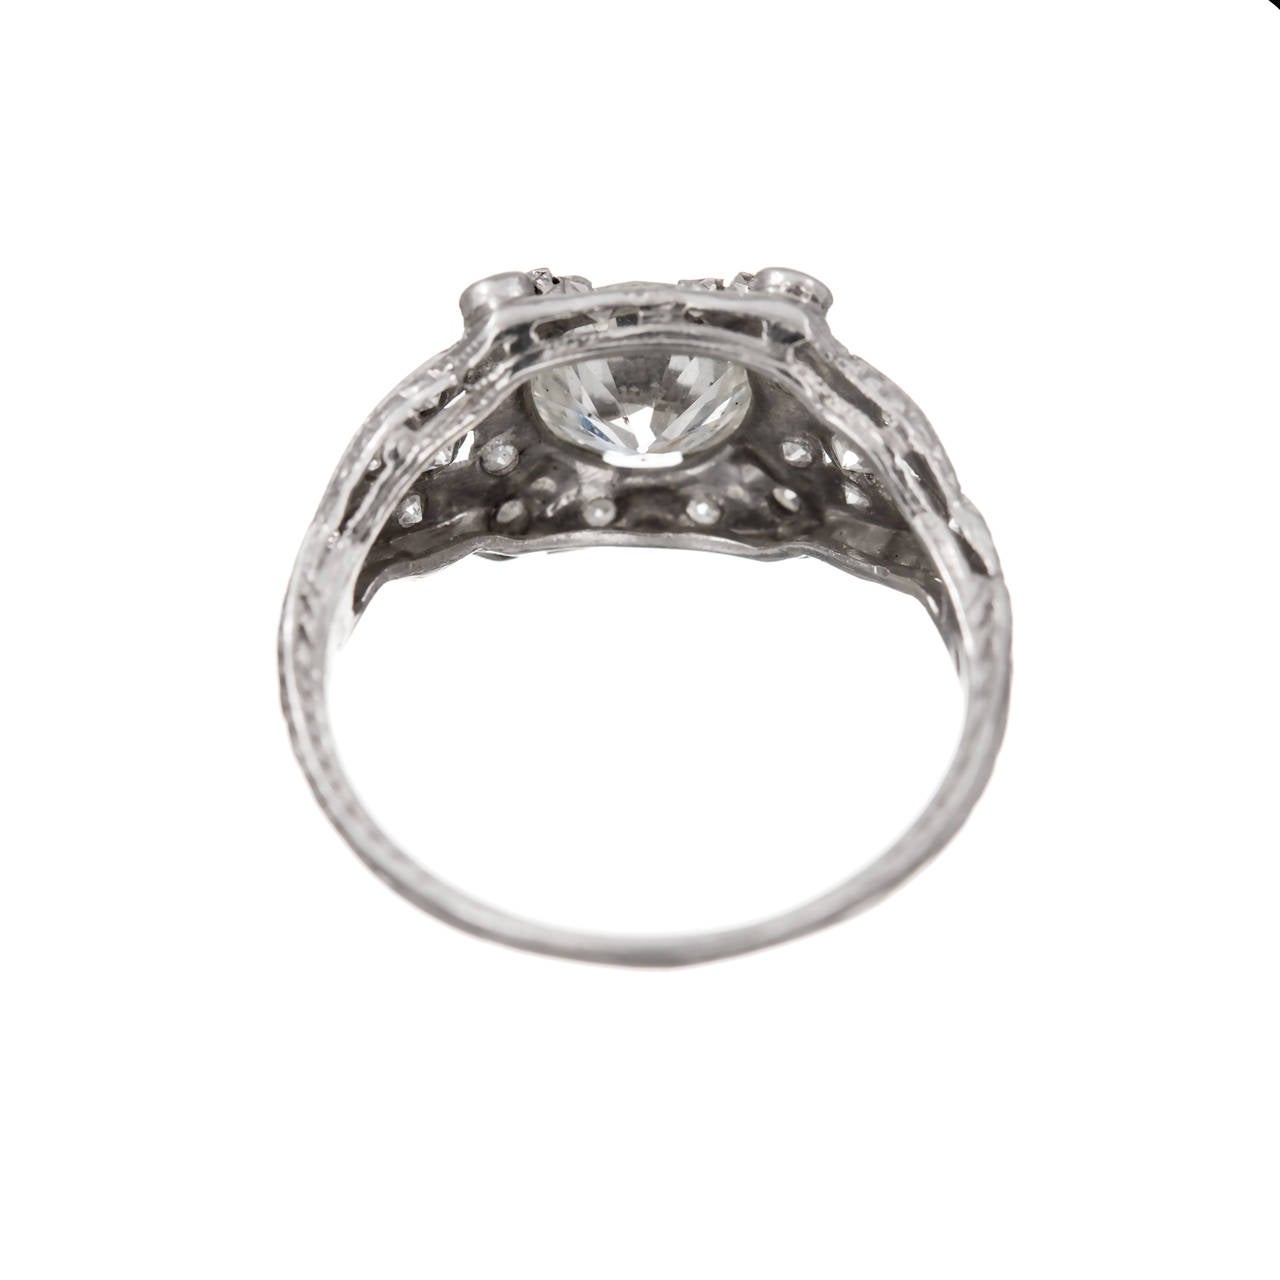 Circa 1960 transitional cut diamond in a handmade open work platinum setting with accent diamonds.

1 transitional brilliant cut Ideal diamond, approx. total weight 1.35cts, H-I, SI2, Depth: 54% Table: 57%, 7.47 x 7.31 x 3.99mm, eye clean.
22 single